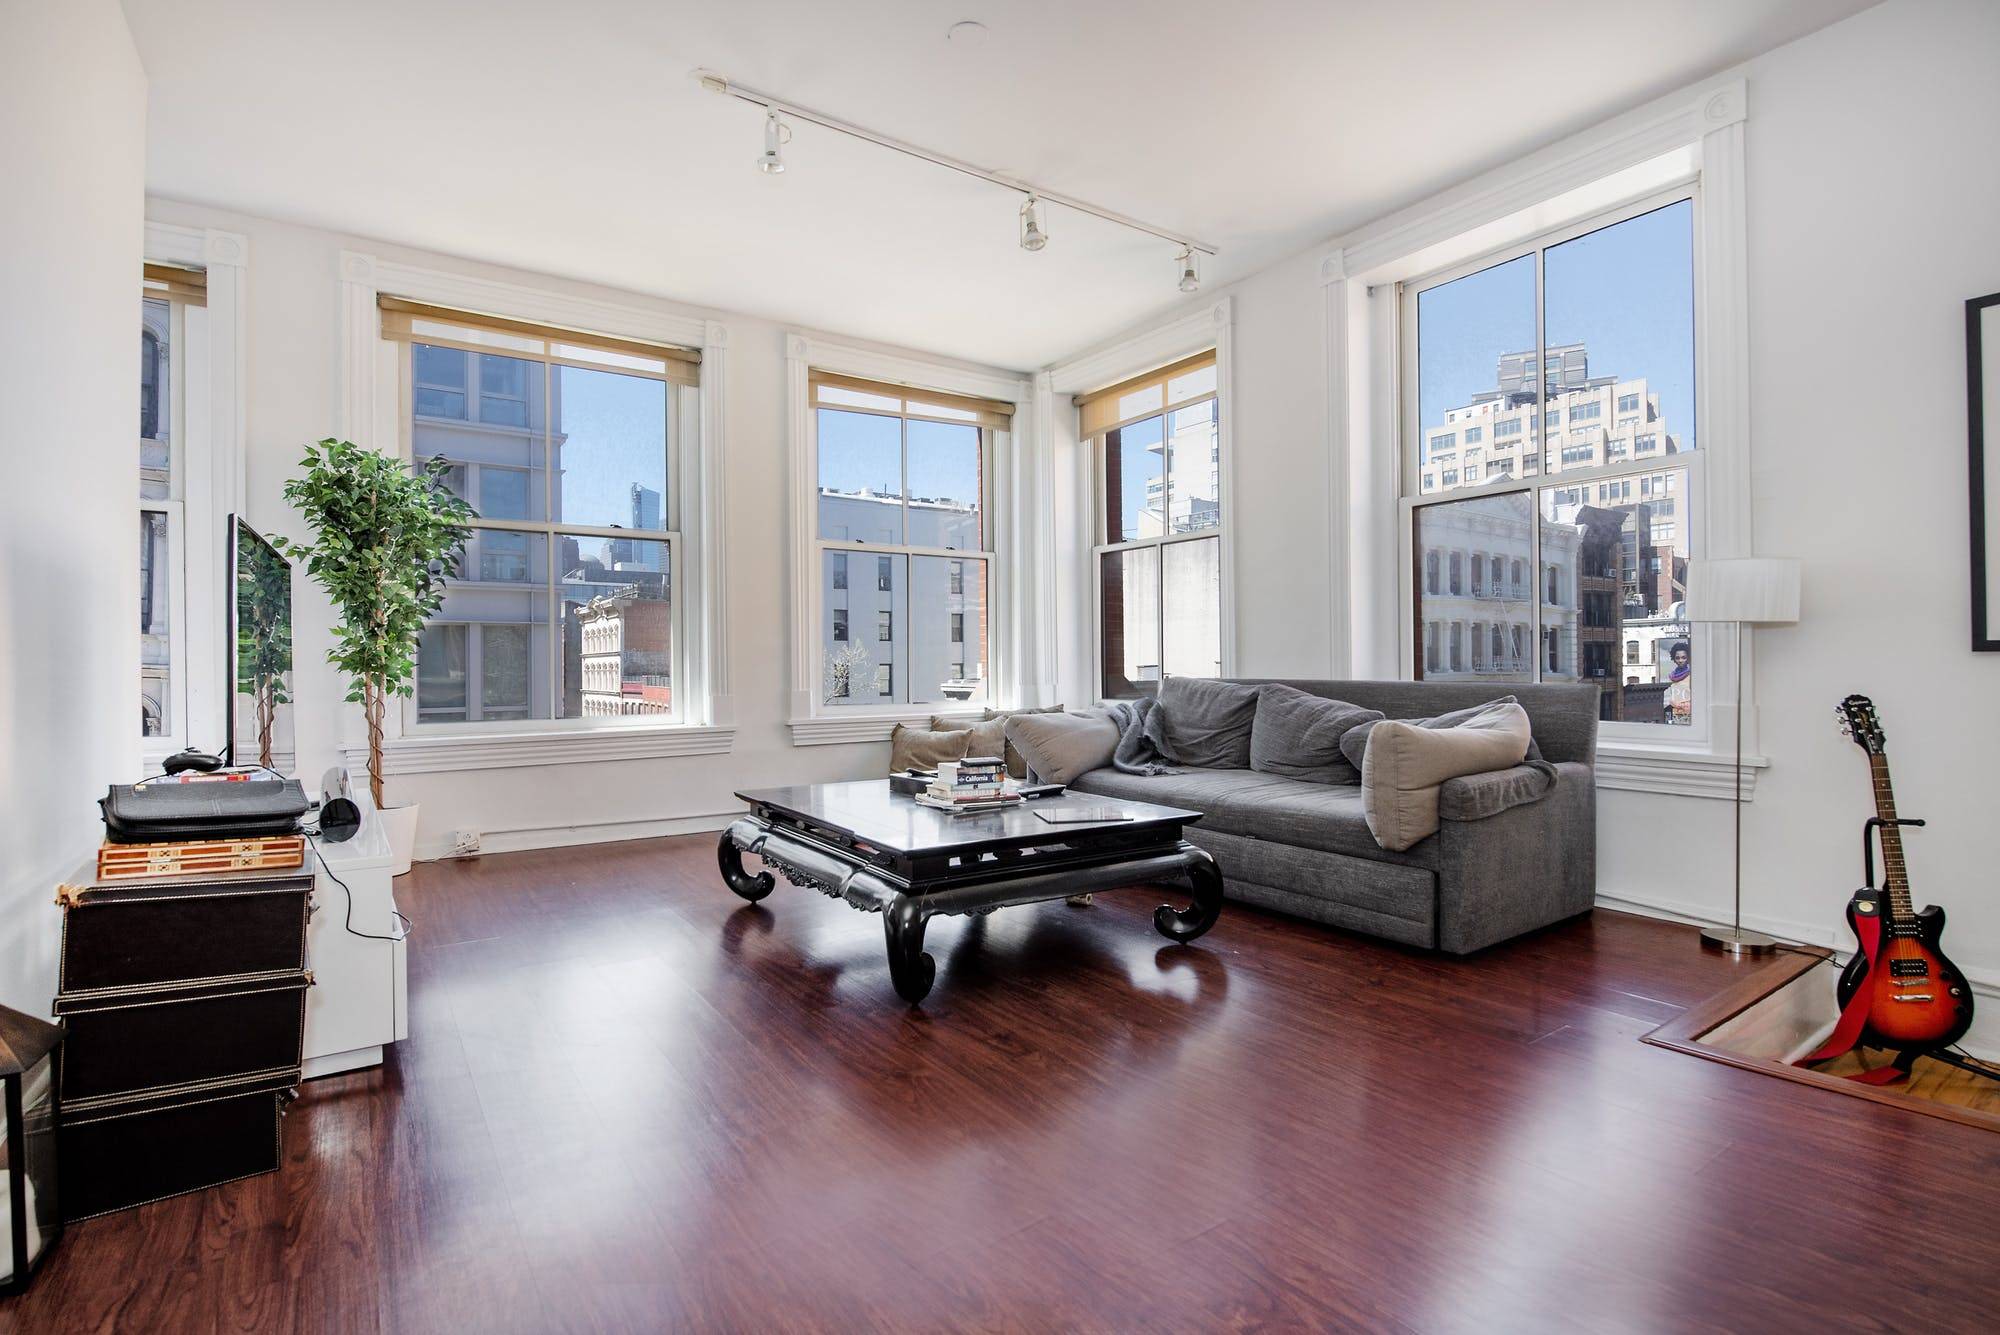 Quintessential Soho loft for rent, located on one of the best blocks in the neighborhood.